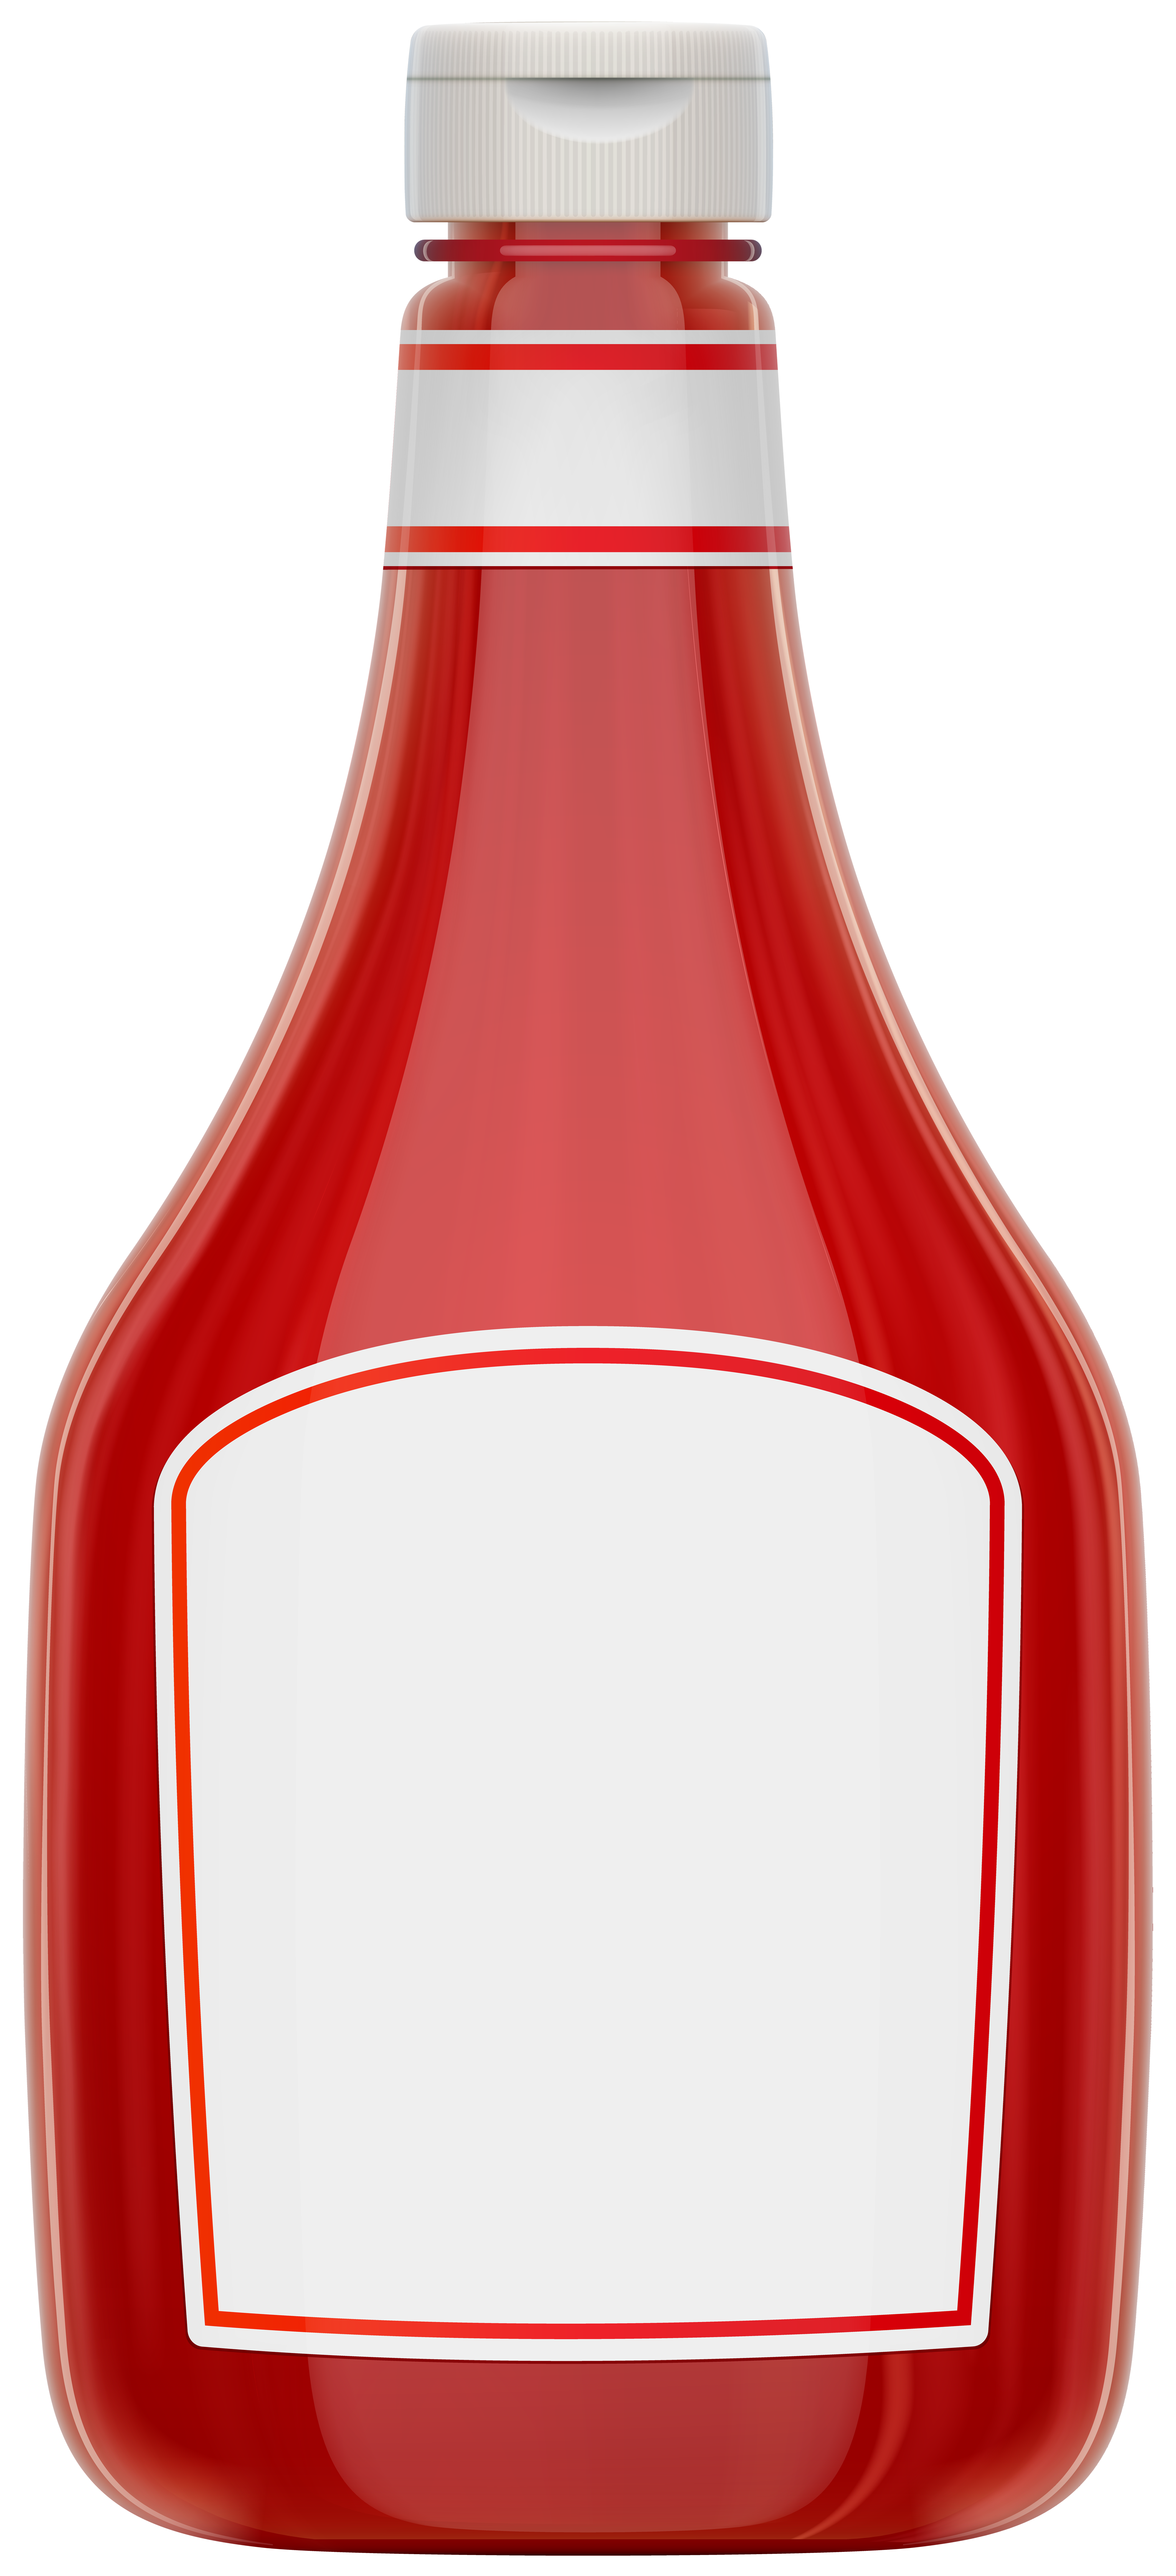 https://gallery.yopriceville.com/var/albums/Free-Clipart-Pictures/Fast-Food-PNG-Clipart/Ketchup_Bottle_Transparent_Image.png?m=1551732837